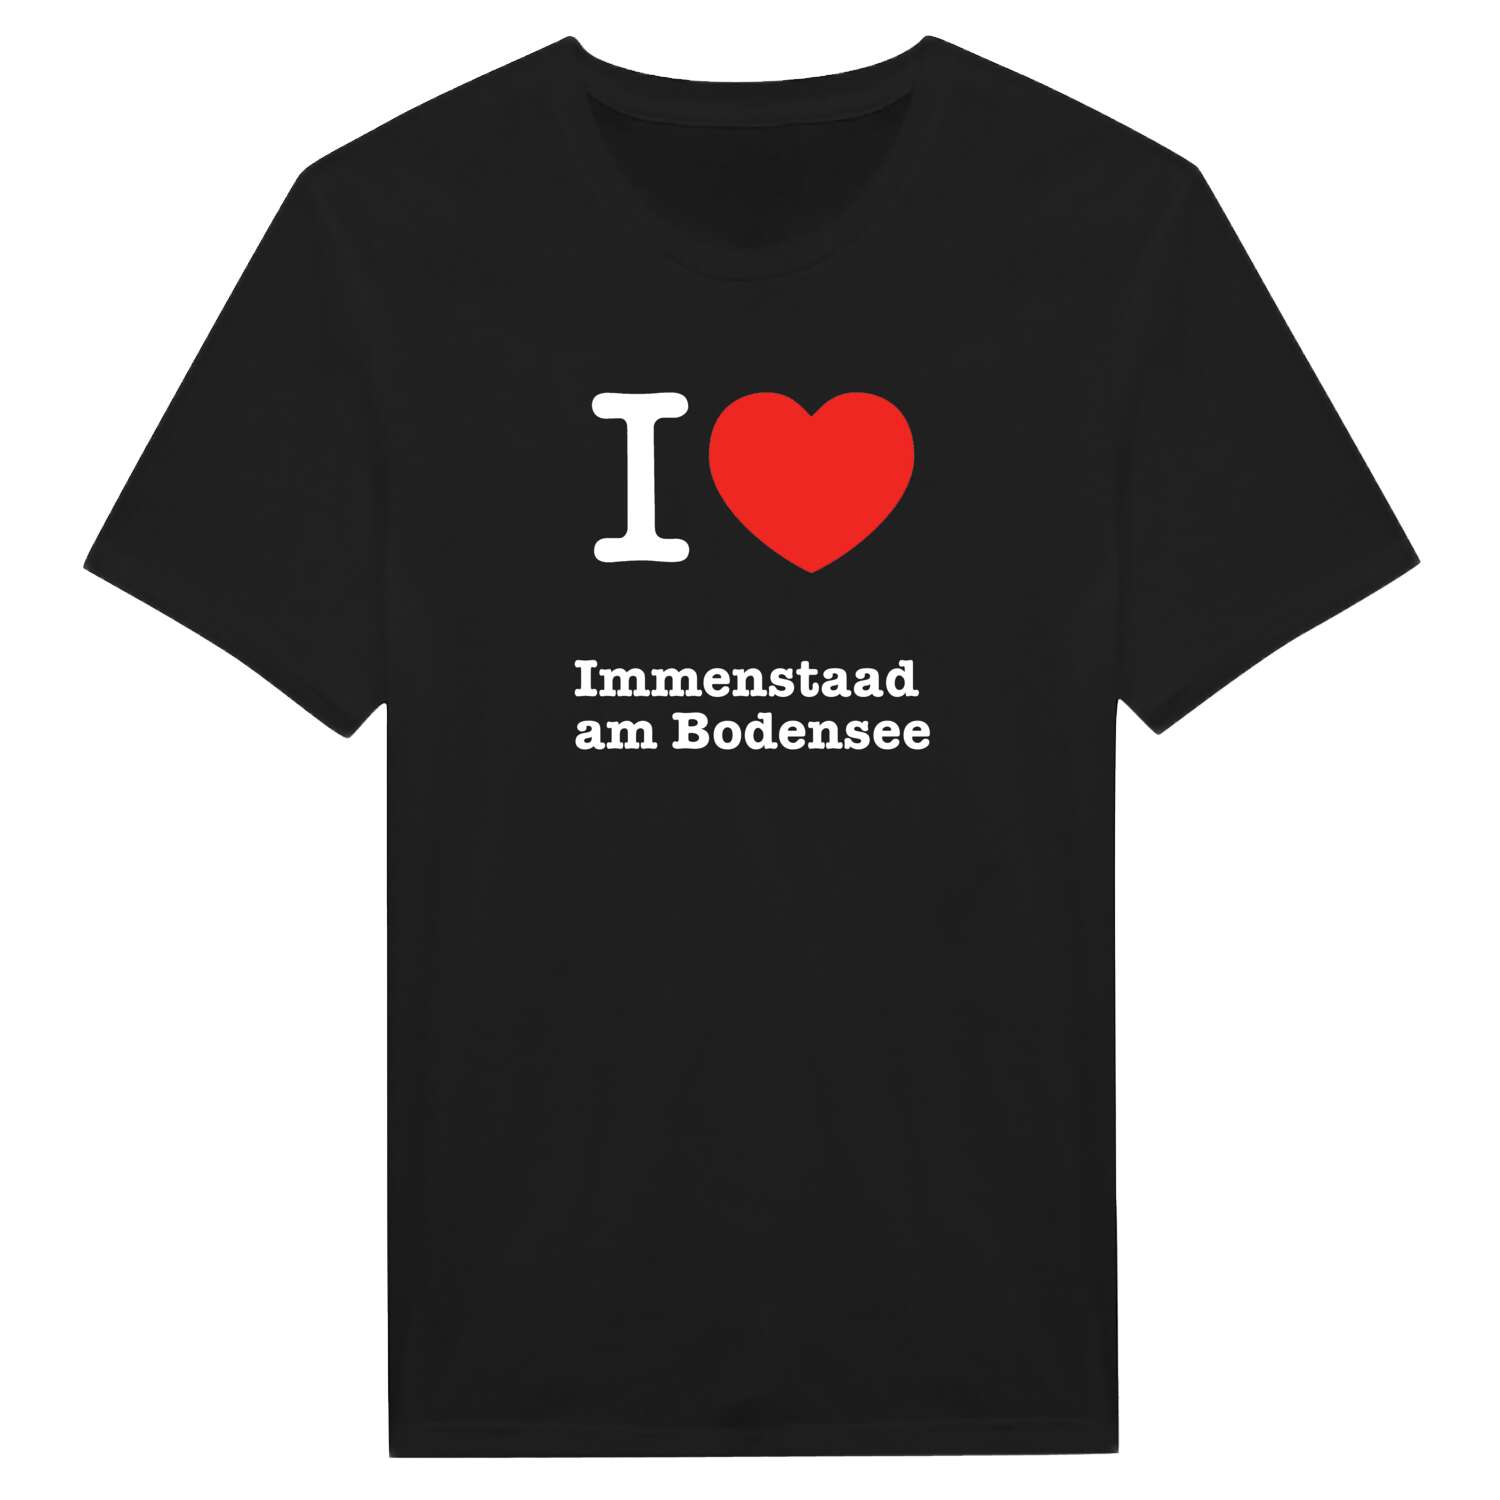 Immenstaad am Bodensee T-Shirt »I love«